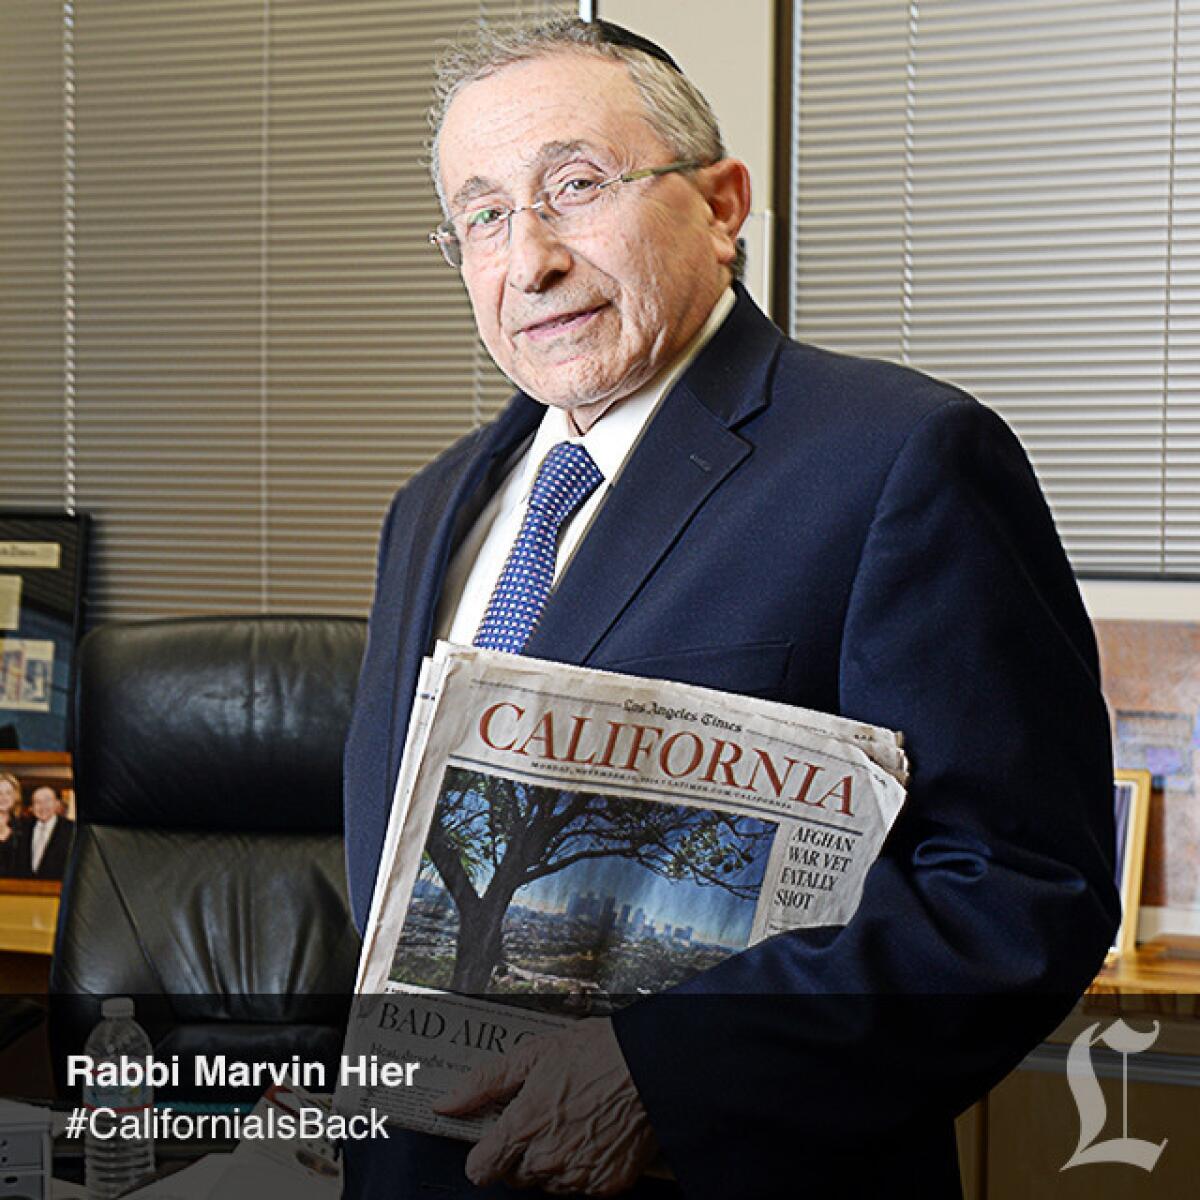 Rabbi Marvin Hier, Simon Wiesenthal Center and Museums of Tolerance.